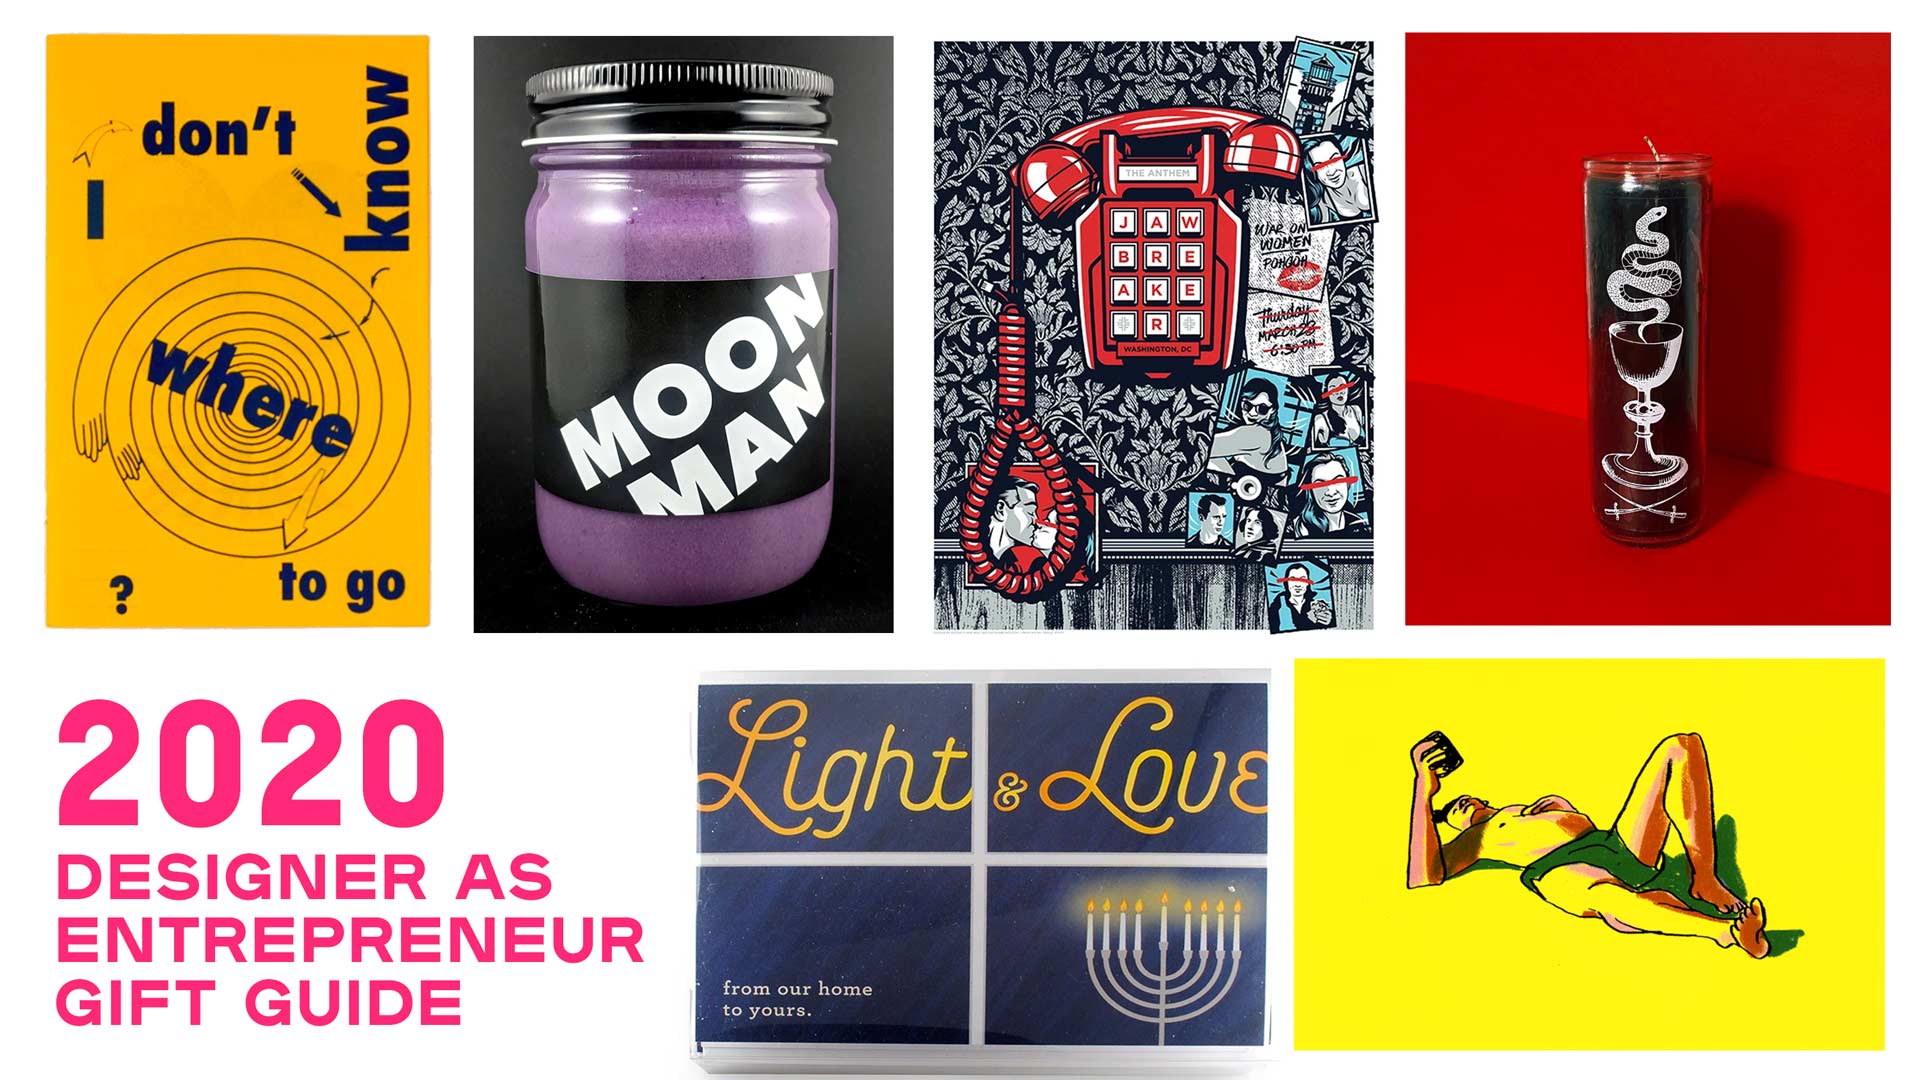 designer as entrepreneur gift guide with product shots of candle, prints book and jar